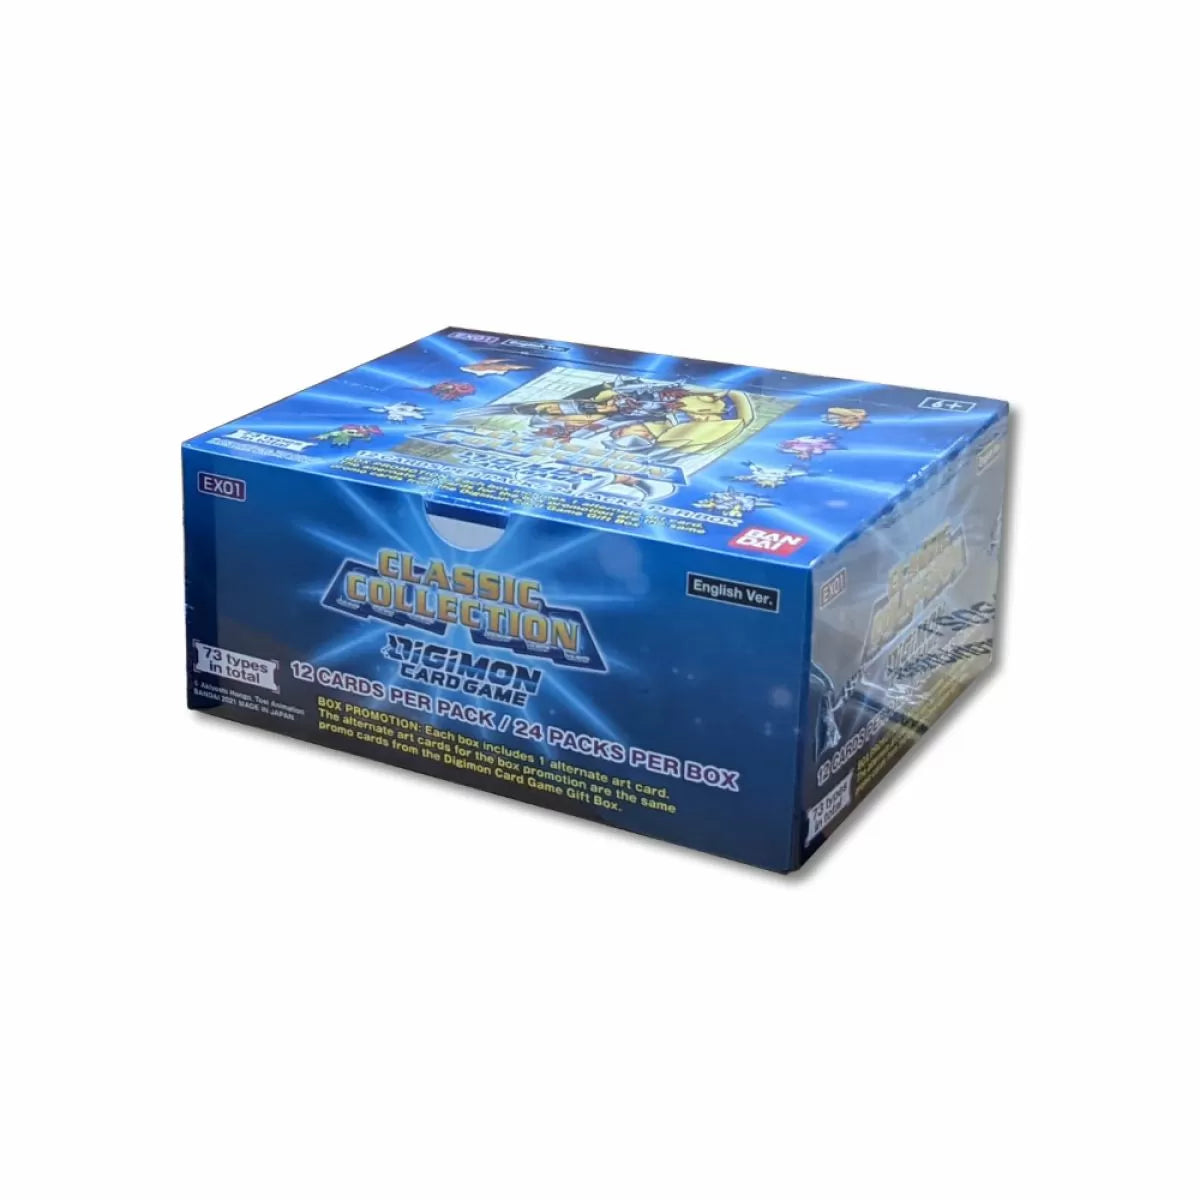 Digimon TCG: EX-01 Classic Collection Booster Box